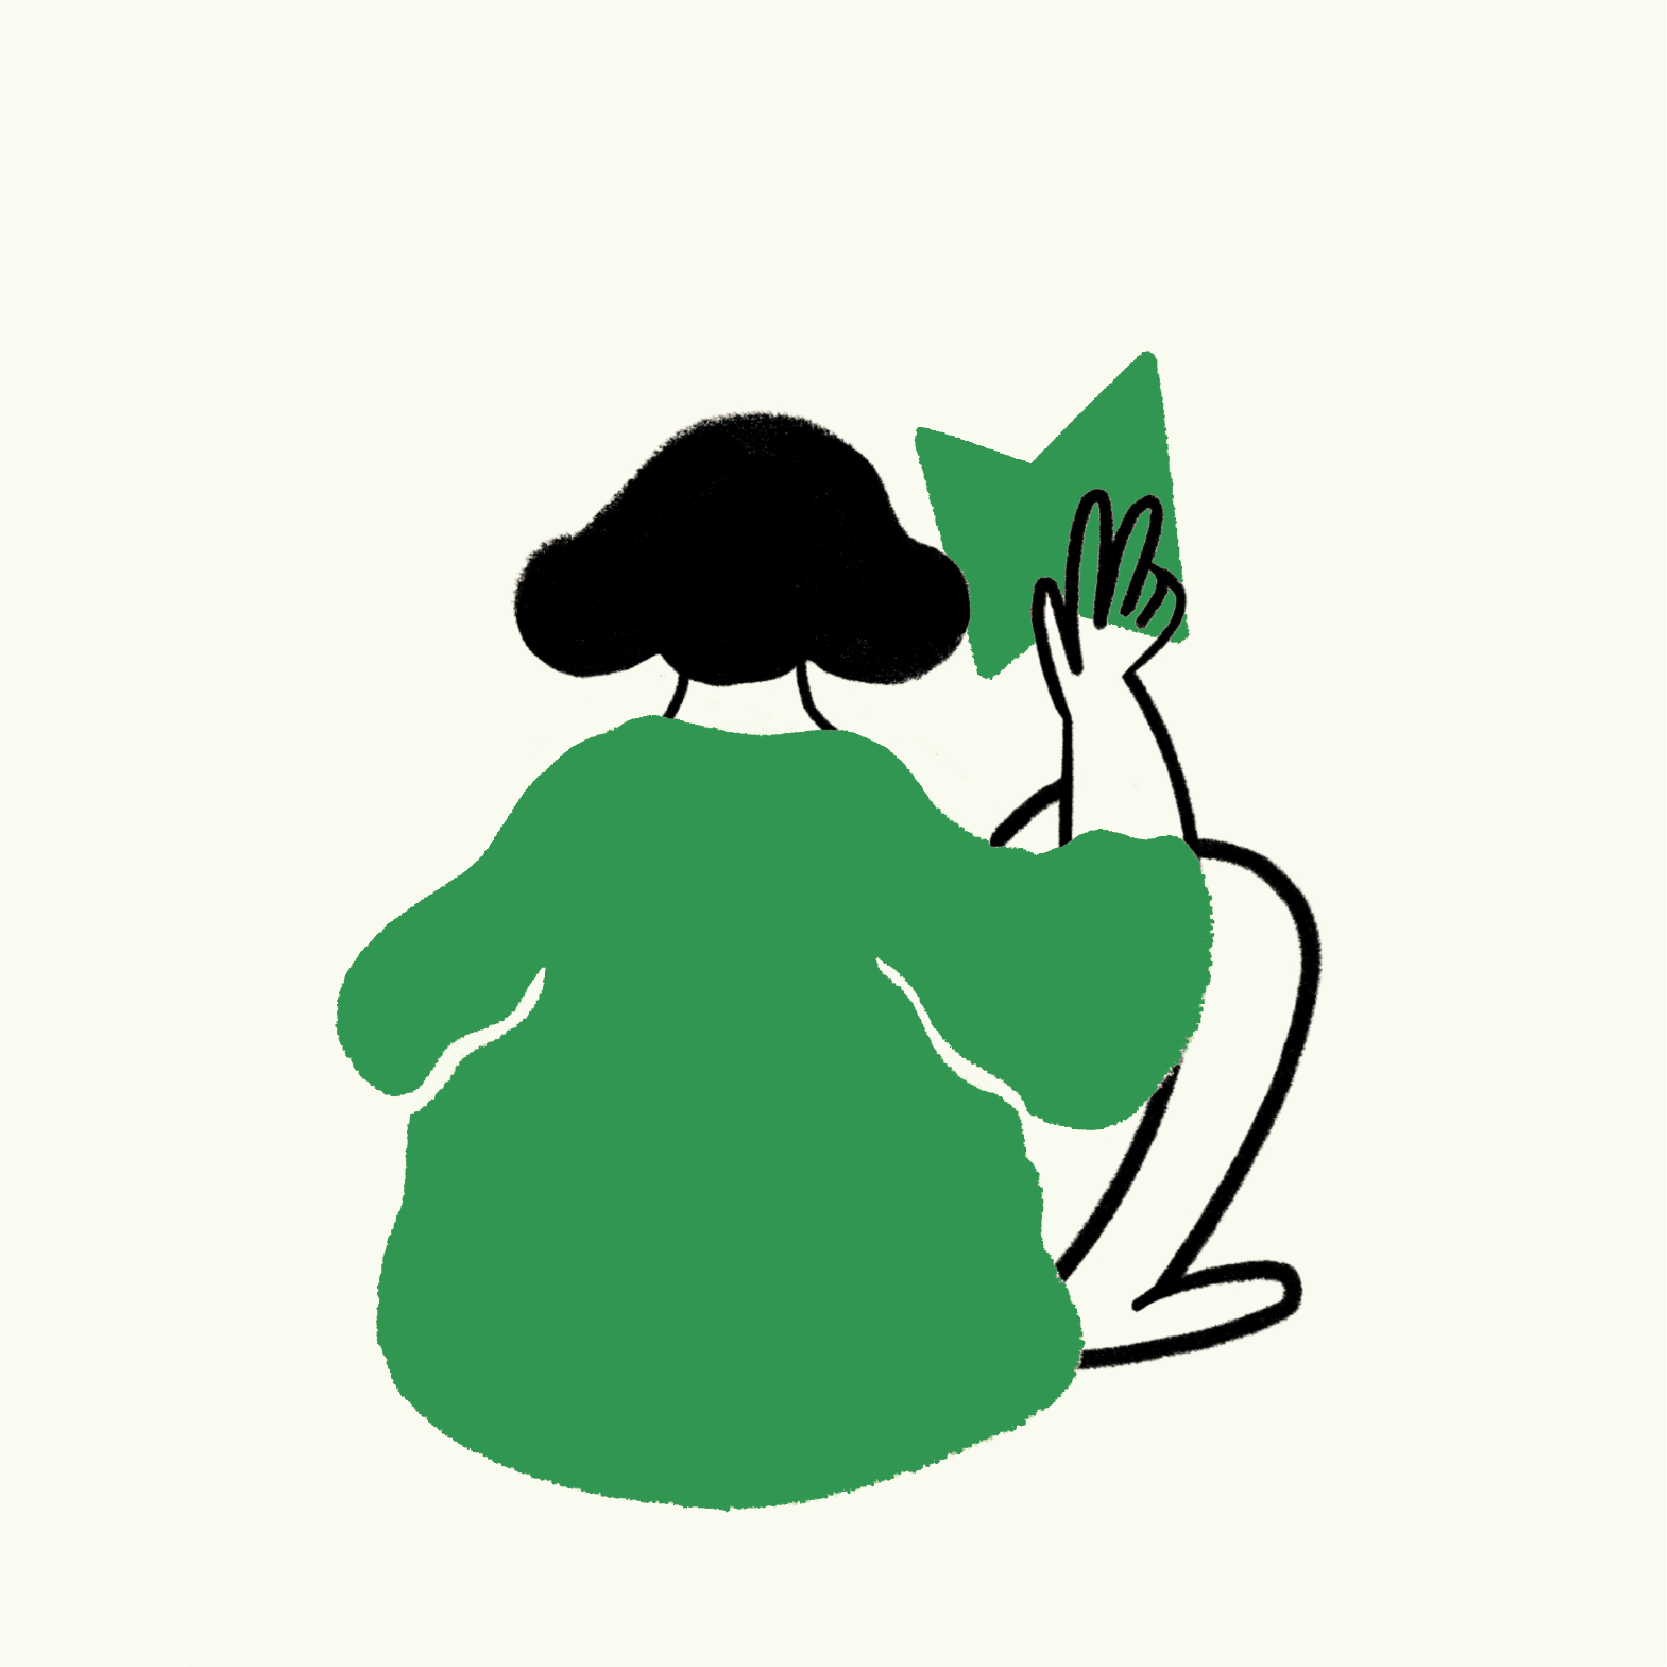 Illustration of woman in green dress sat down with her back to us reading